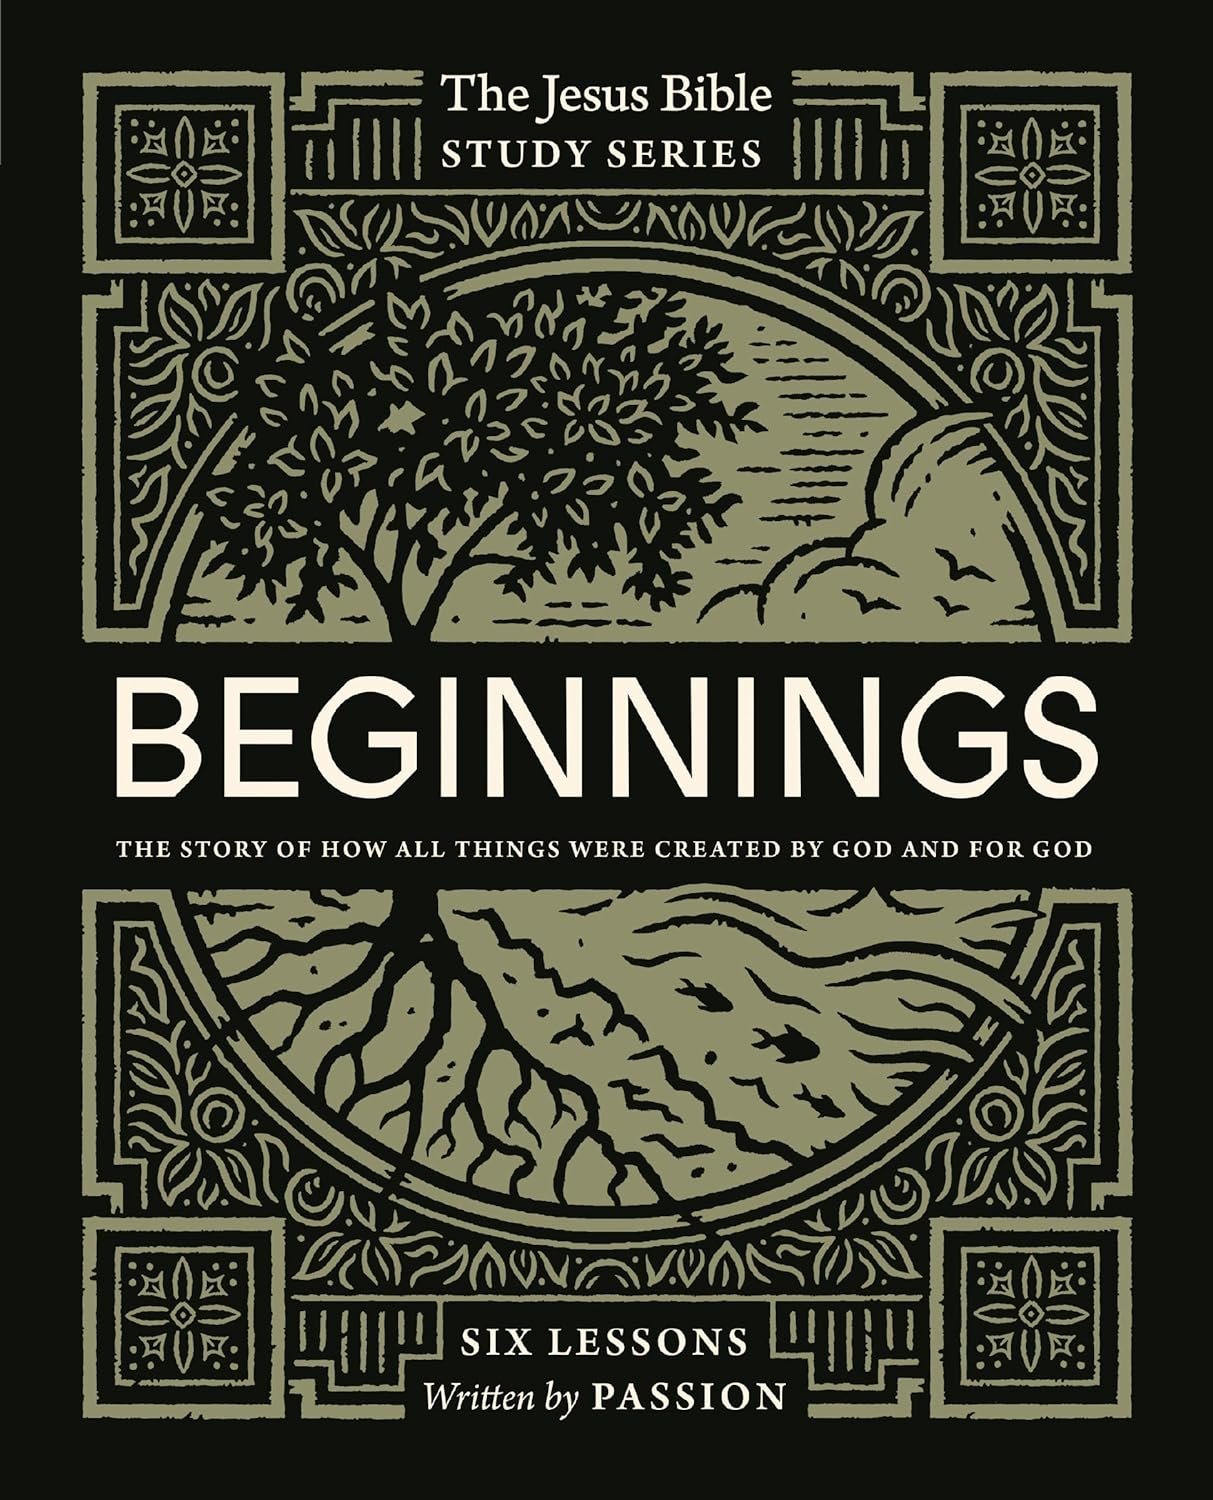 Cover of "the Beginnings Bible Study Guide: The Story of How All Things Were Created by God and for God (Jesus Bible Study Series)" by Passion Publishing featuring intricate designs with a central tree motif, surrounded by symmetrical patterns and floral elements, all in green and black.